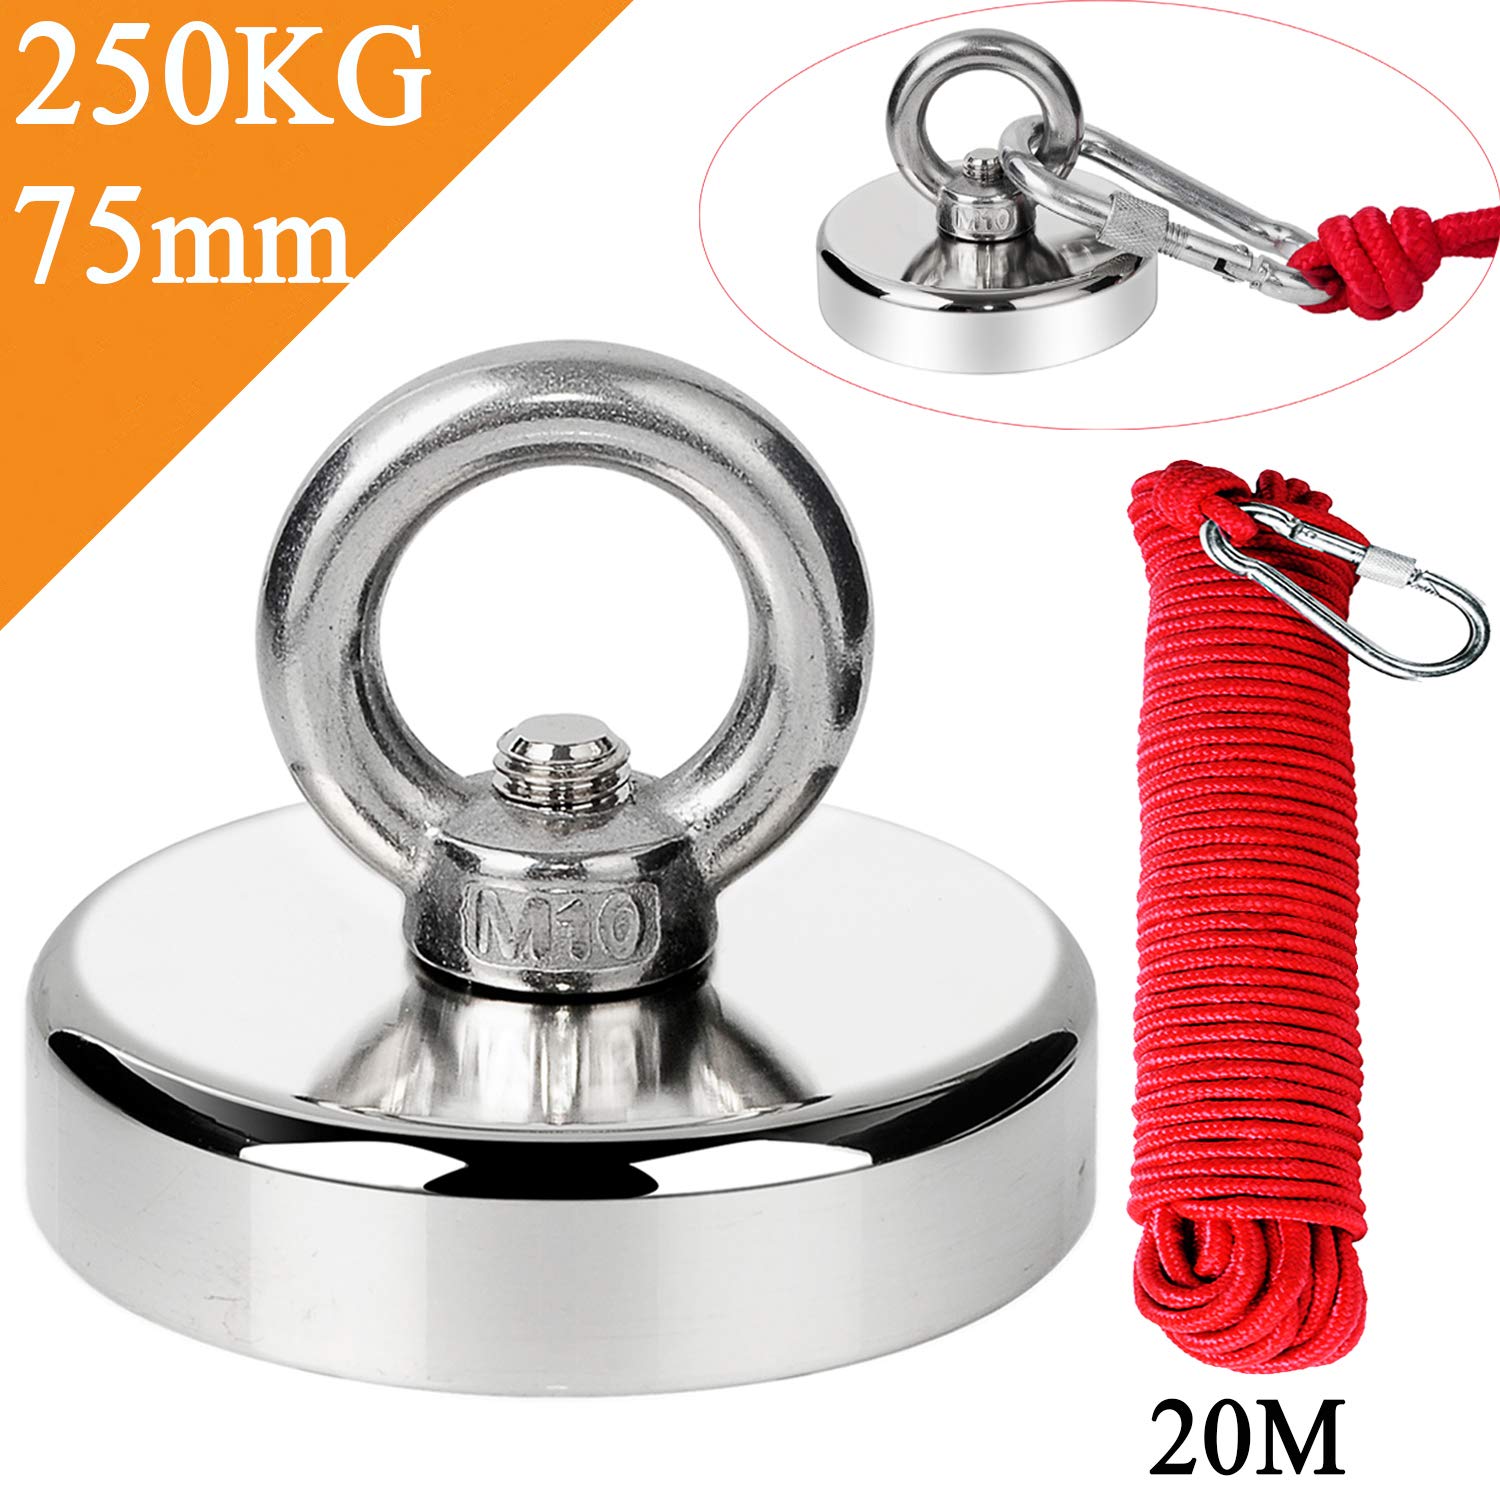 Magnet Fishing Kit with Strong Magnet for Pulling 550 lbs, 20m